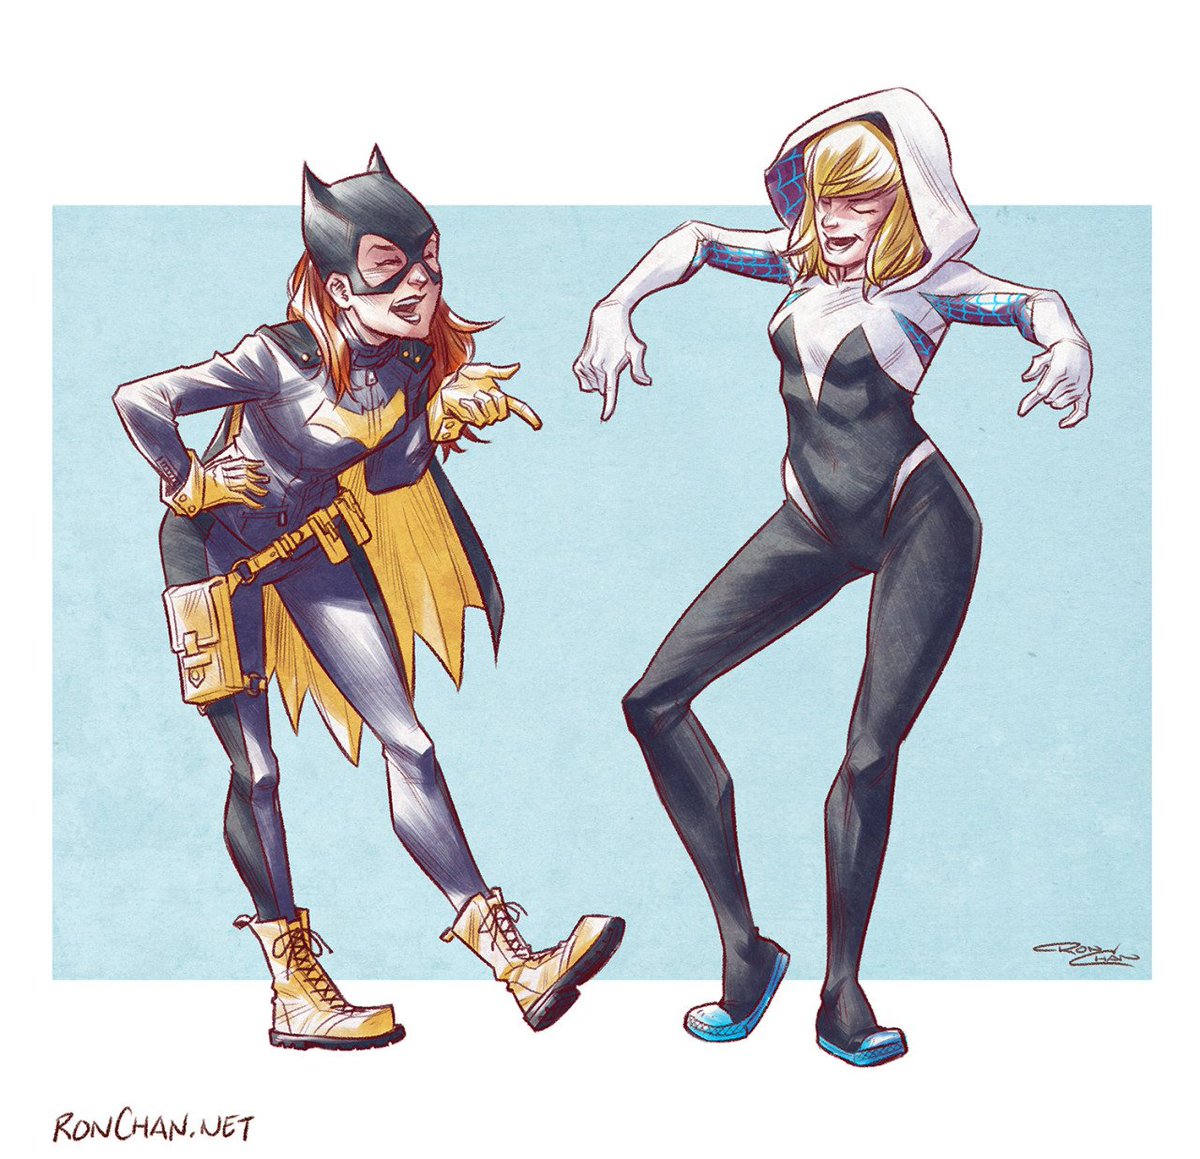 Trace of Batgirl (Barbara Gordon) and Spider-Gwen/Ghost-Spider (Gwen Stacey)Original Artist Credit: Ron Chan  @rondanchanPrint and colour in for free from link  http://fav.me/ddvf8zf SHOW ME YOU COLOURS!!!